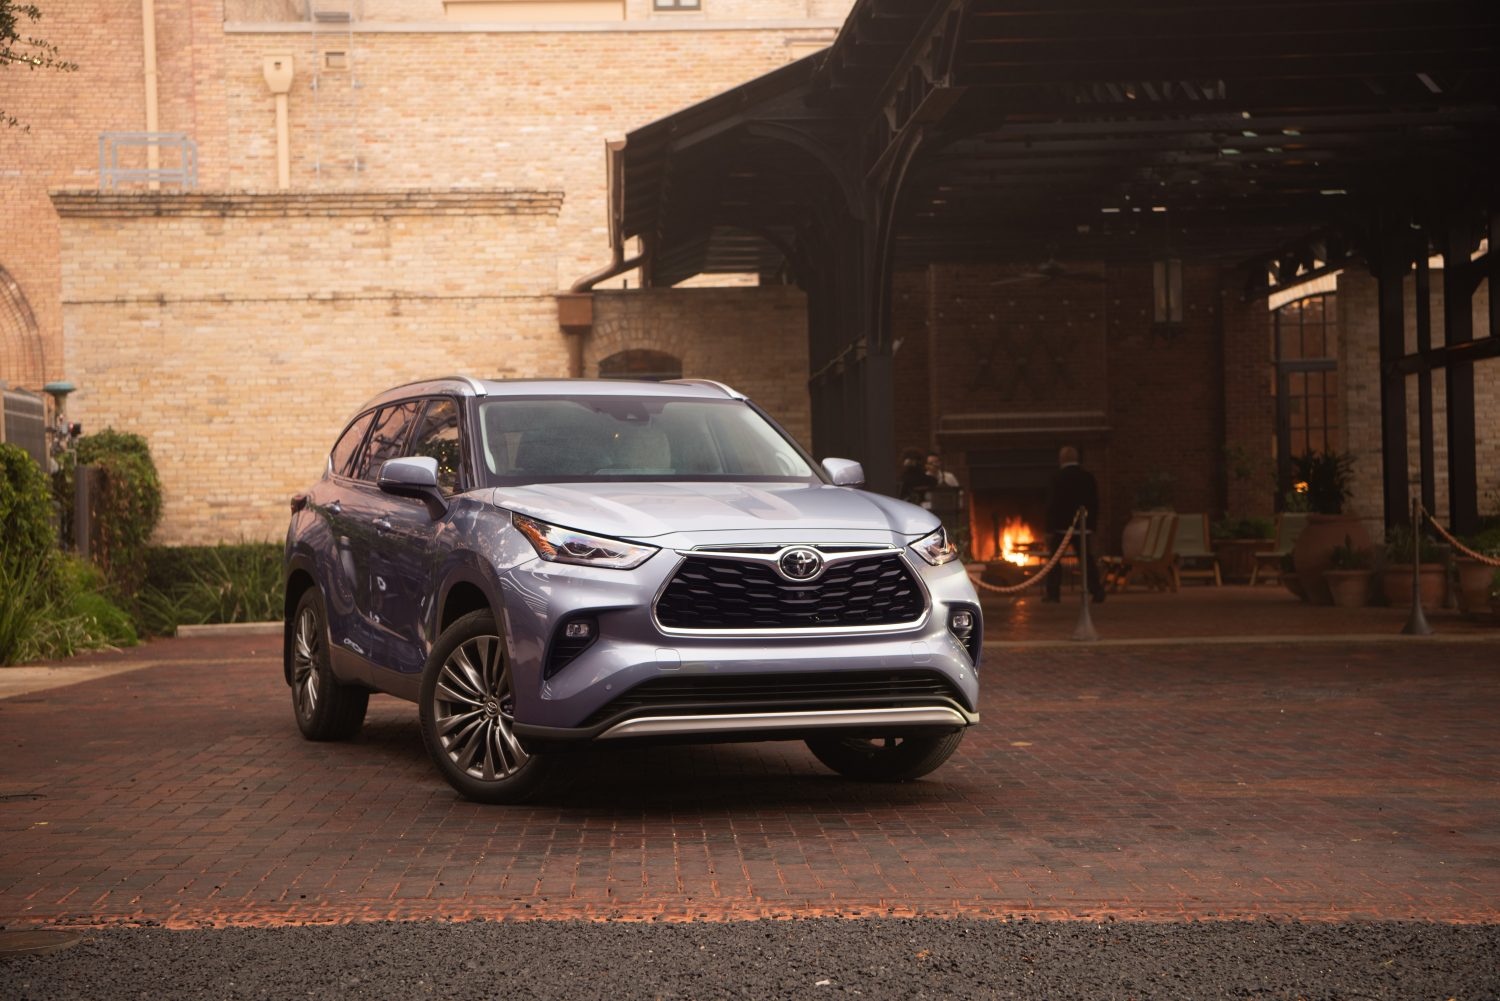 The Safest SUVs with 3 Rows include the Toyota Highlander